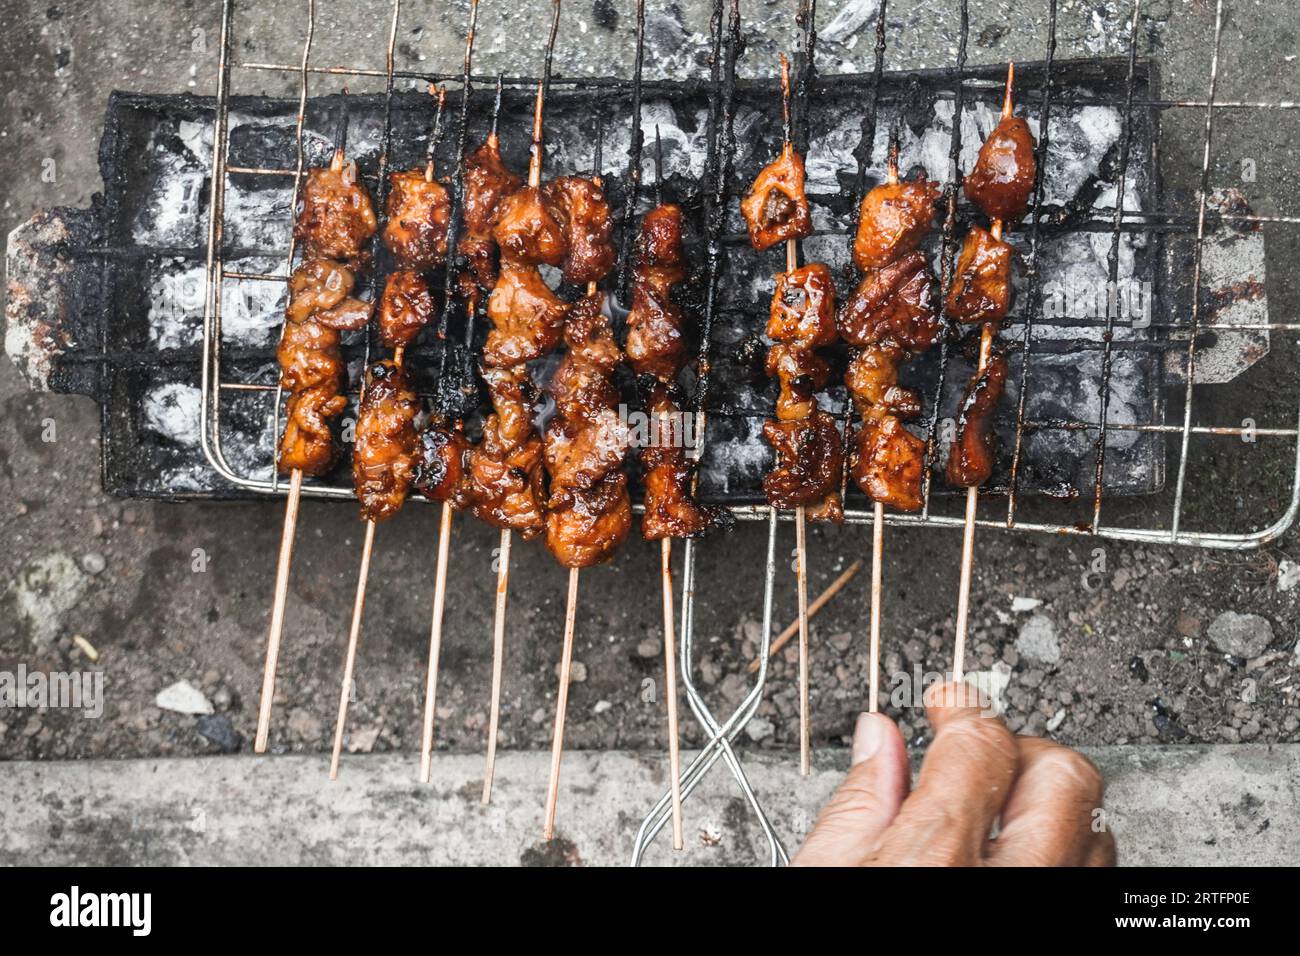 Top view of Sate or satay, traditional food from Indonesia is being grilled on fiery charcoal. Stock Photo